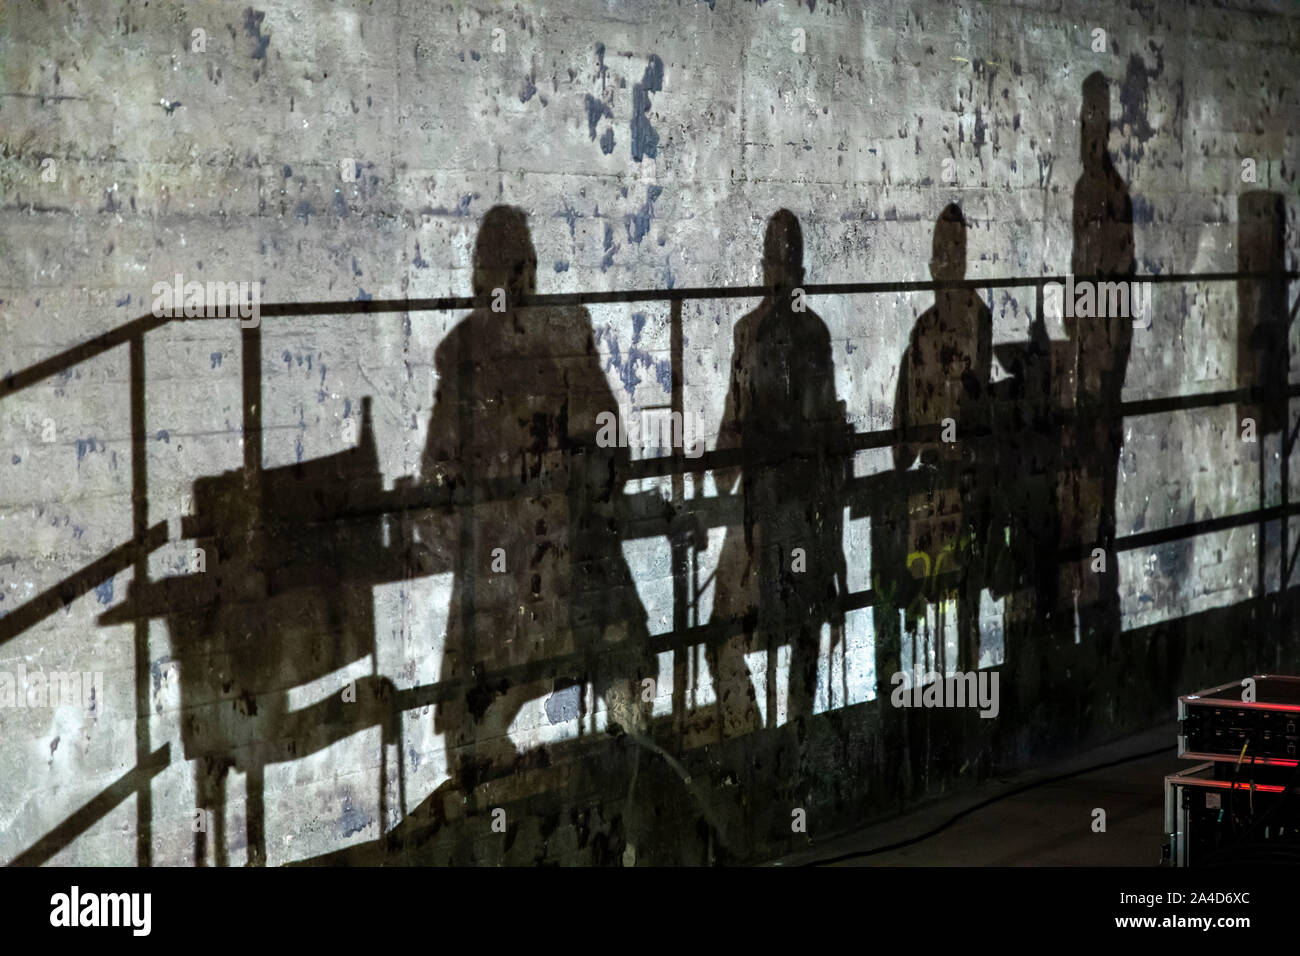 Shadows of participants of an event sitting on a stage and discussing on a wall, Stock Photo